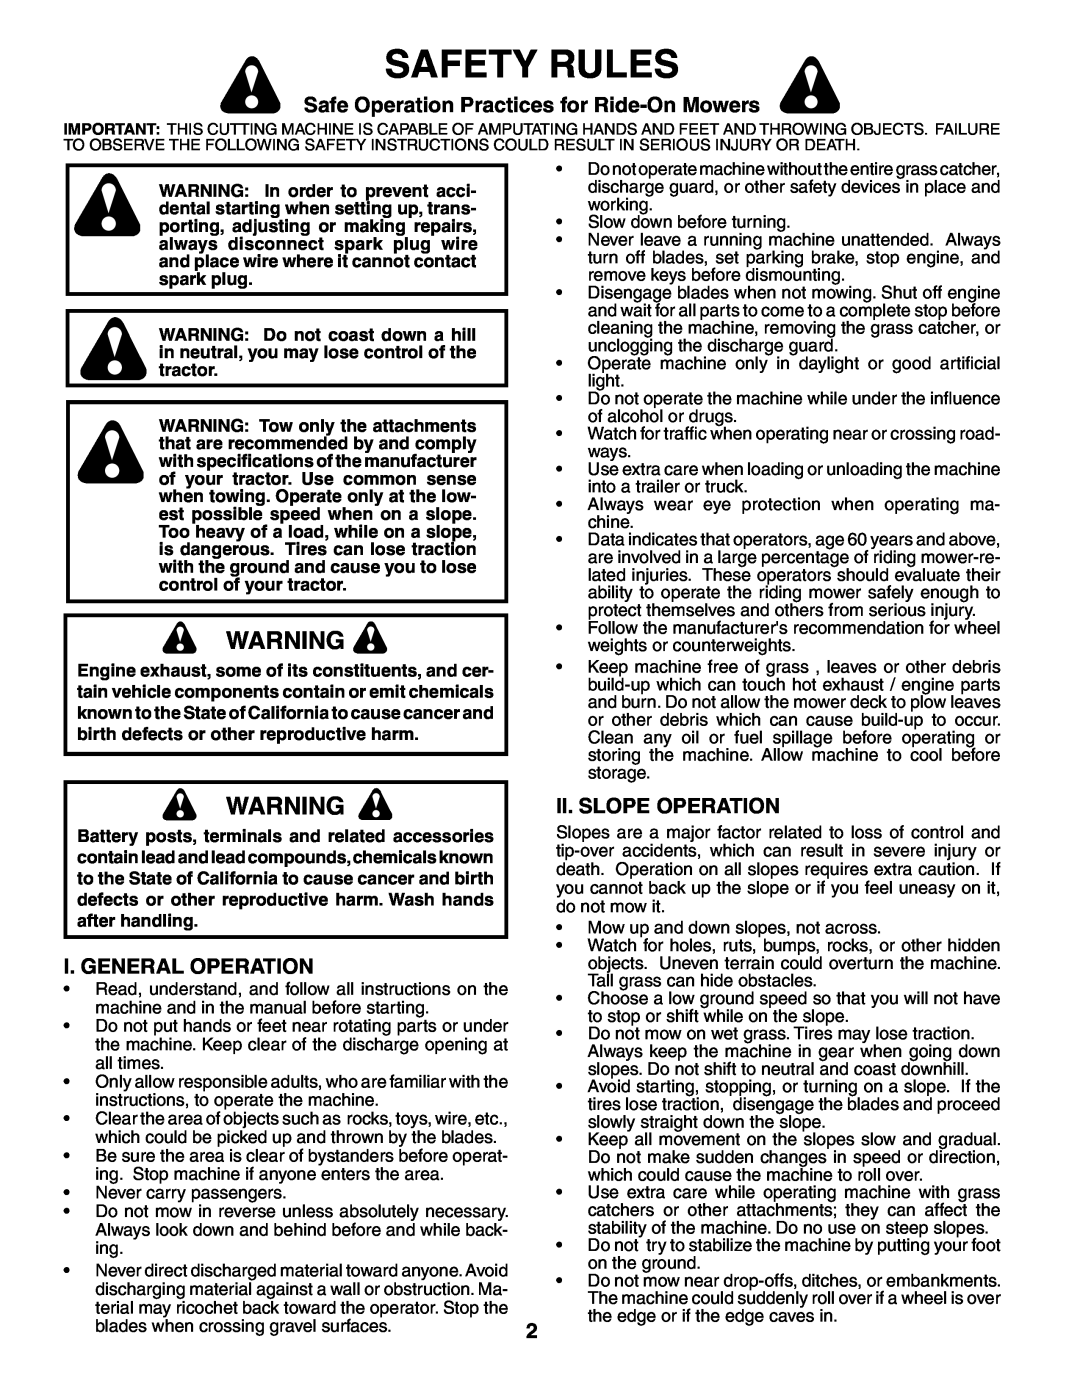 Poulan 96012004600 Safety Rules, Safe Operation Practices for Ride-On Mowers, I. General Operation, Ii. Slope Operation 